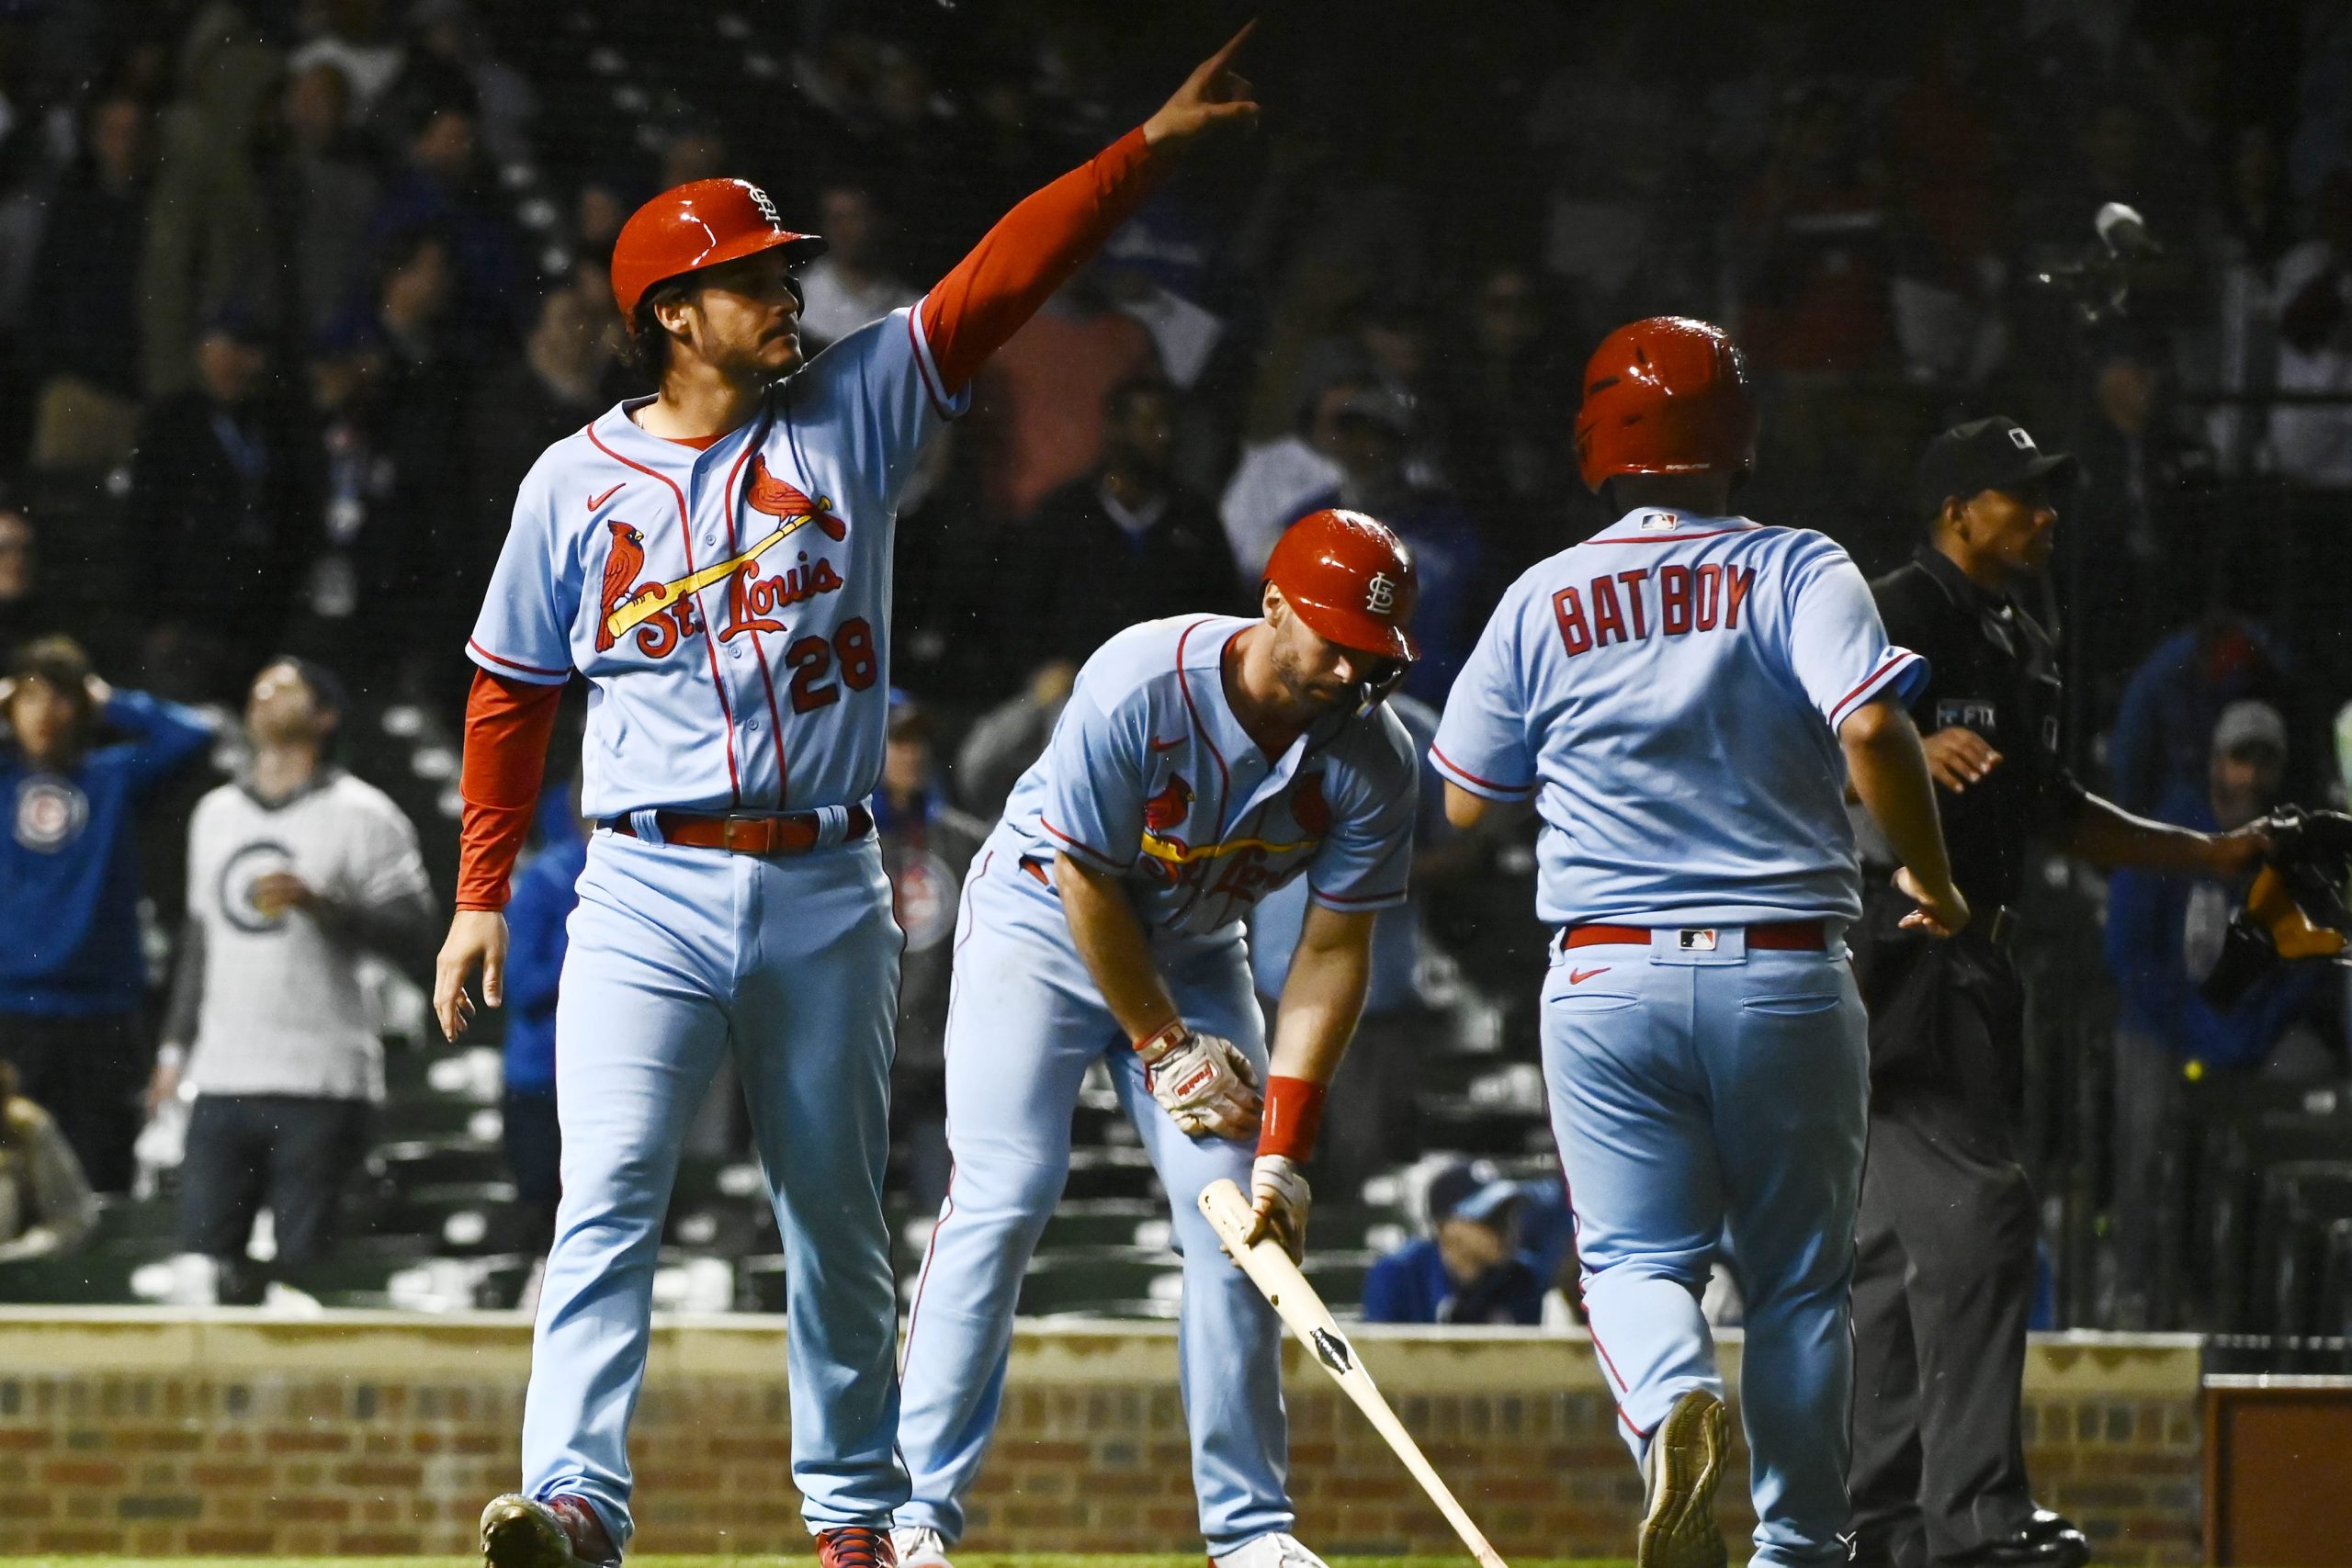 St. Louis Cardinals third baseman Nolan Arenado (28) points towards third baseman Brendan Donovan (not pictured) after scoring on a RBI double by Donovan against the Chicago Cubs in the tenth inning at Wrigley Field.